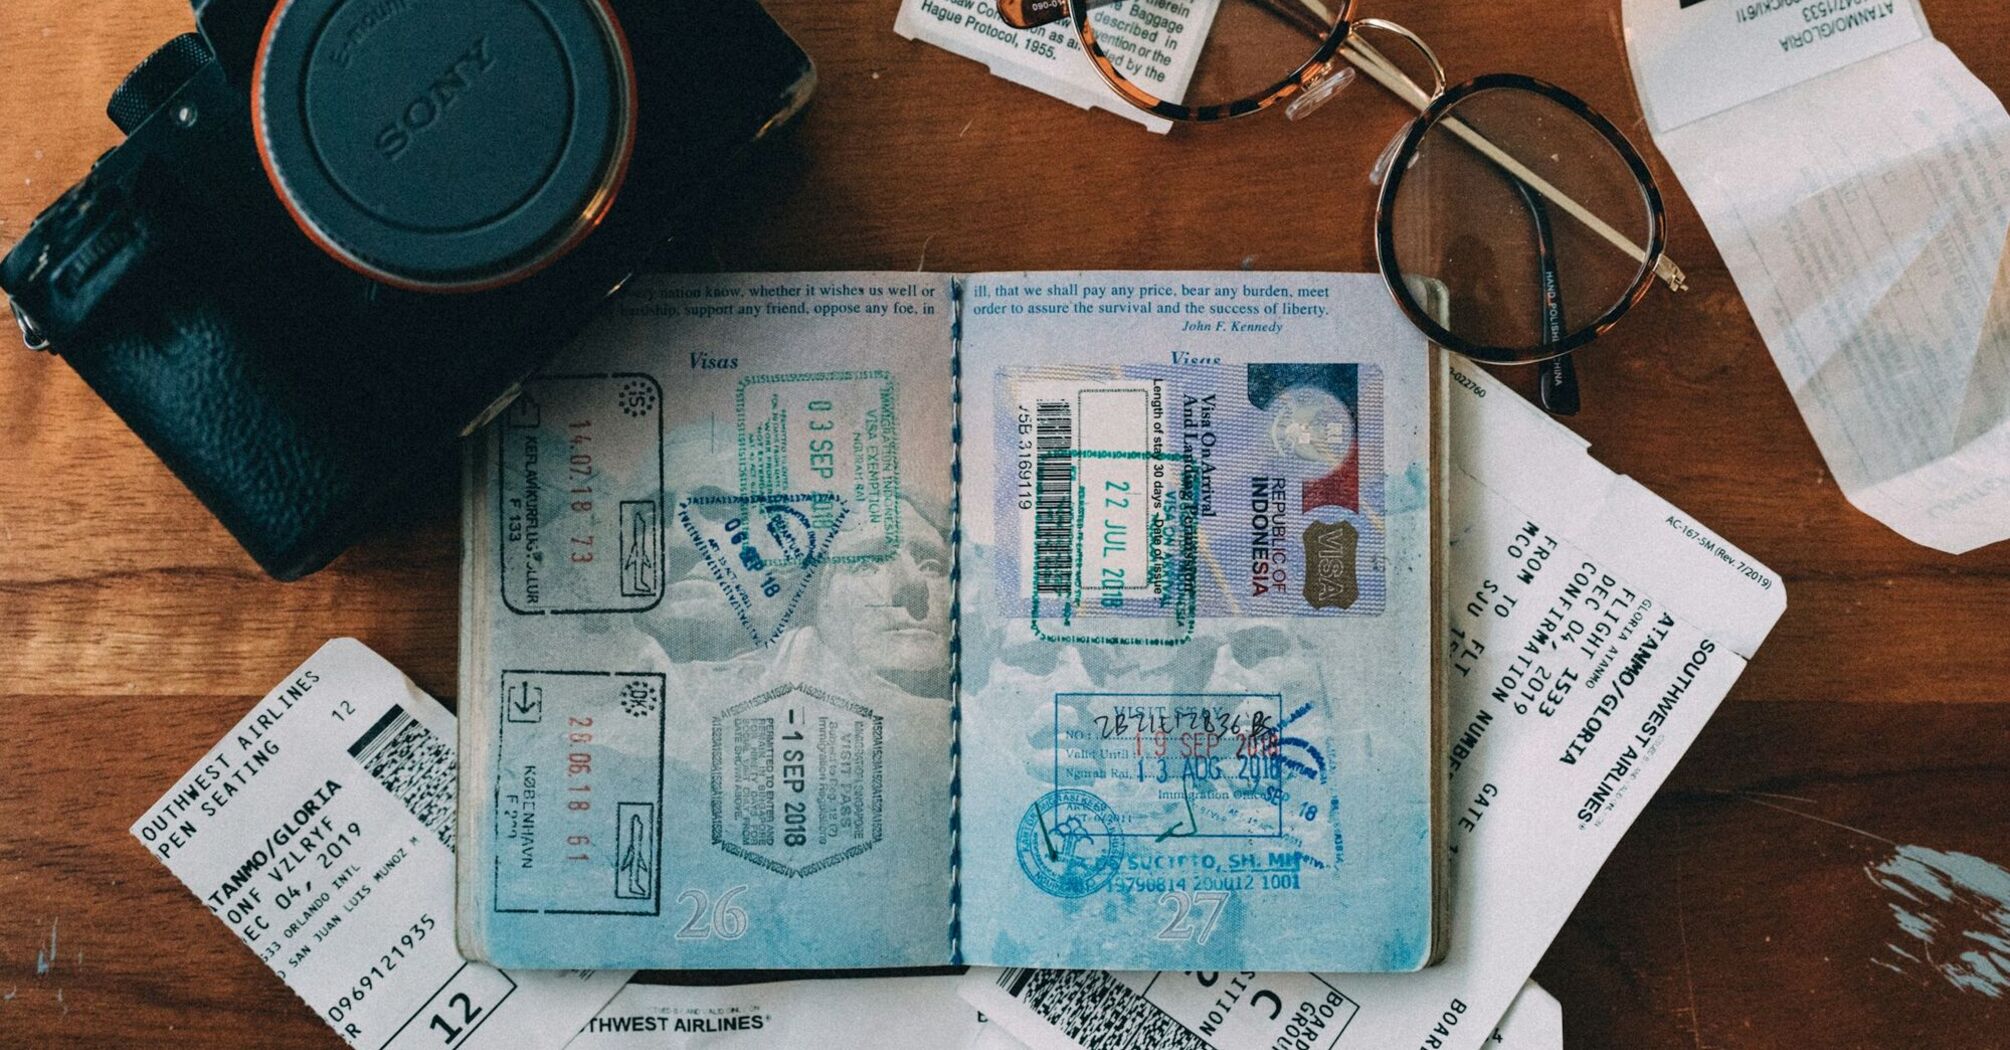 Travel essentials including passport and boarding passes